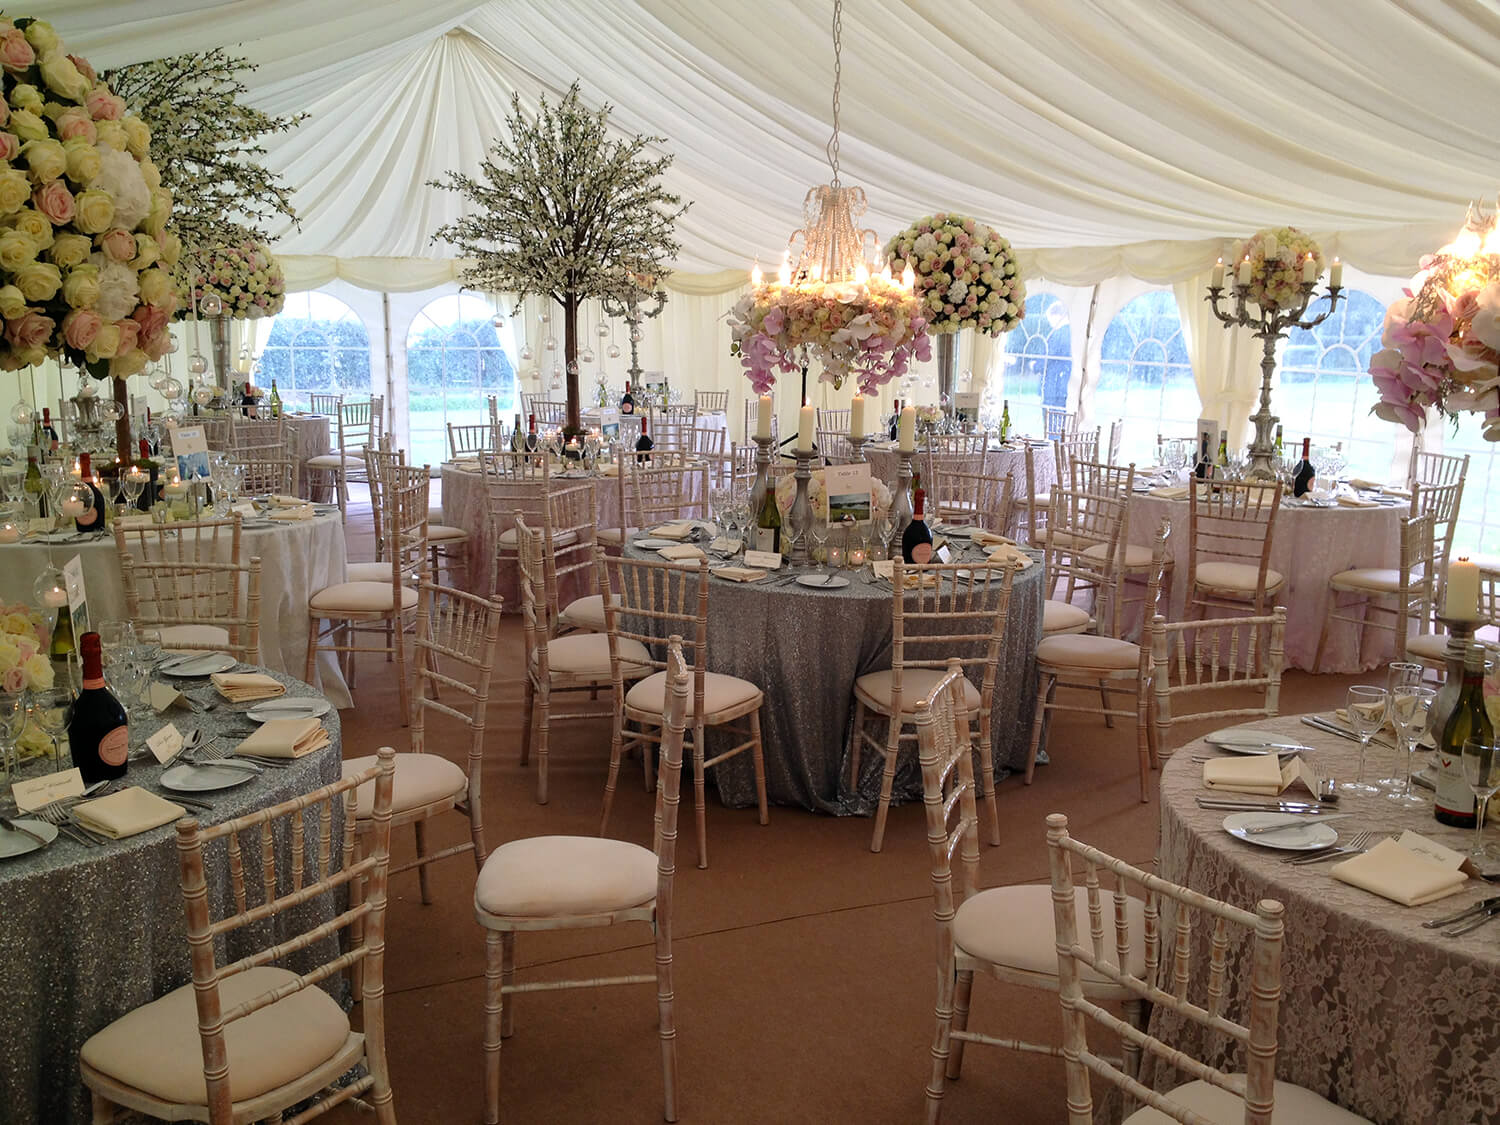 Marquee Hire for Parties Showing Inside with Tables